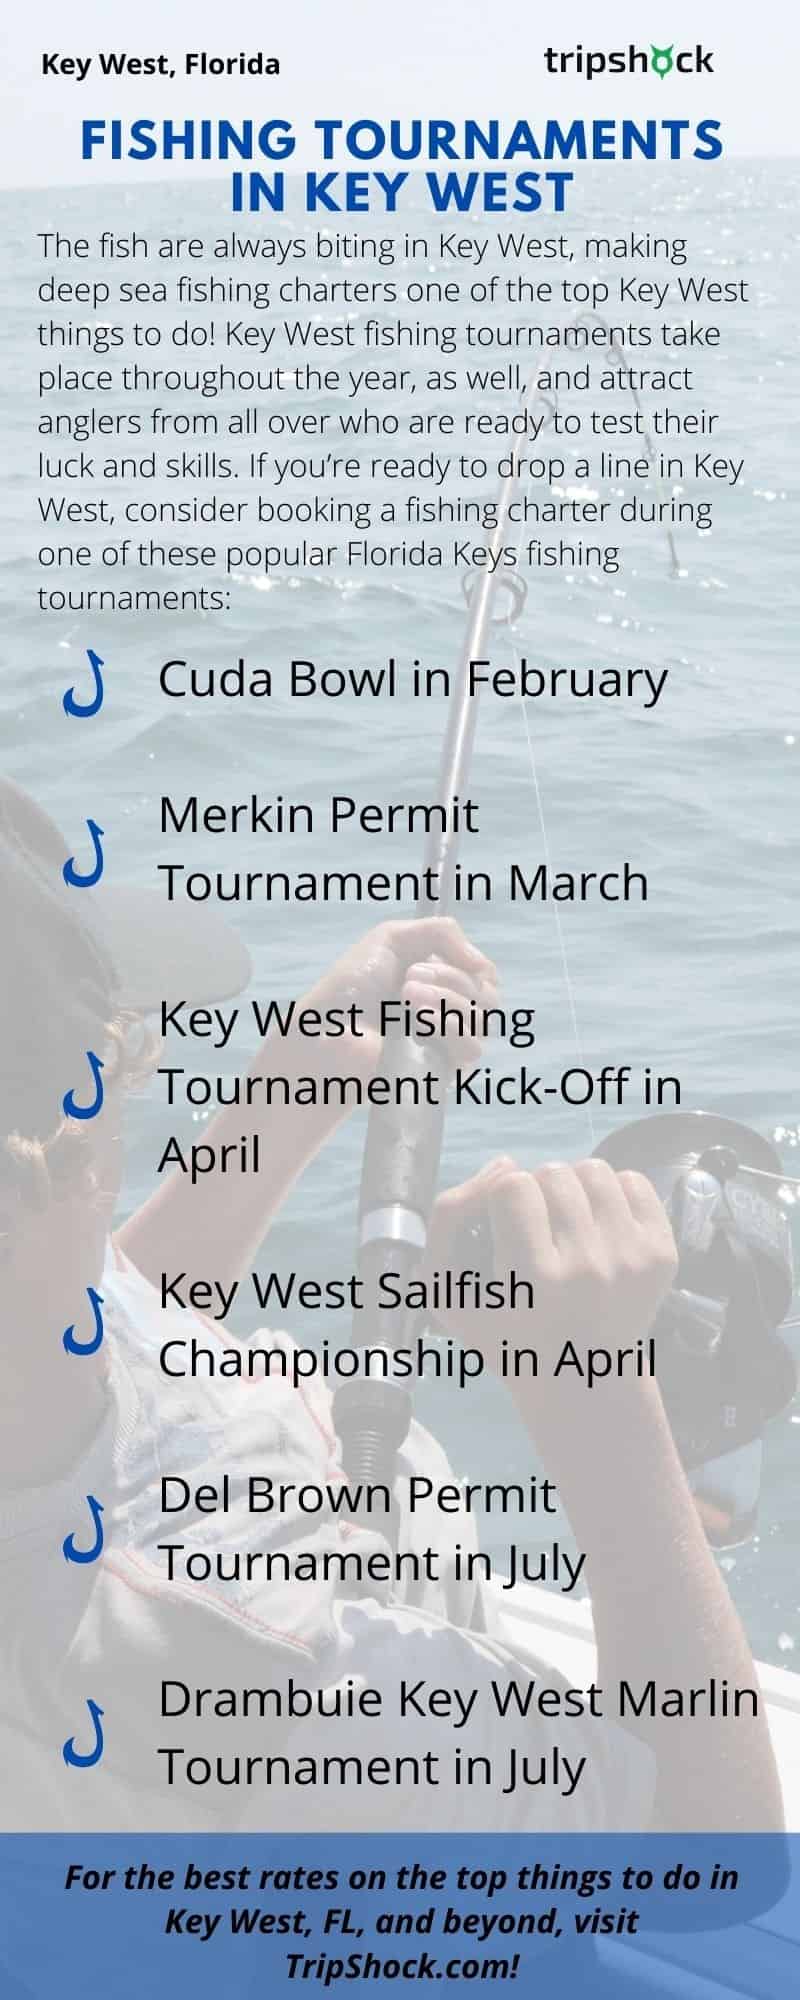 Popular Fishing Tournaments in Key West